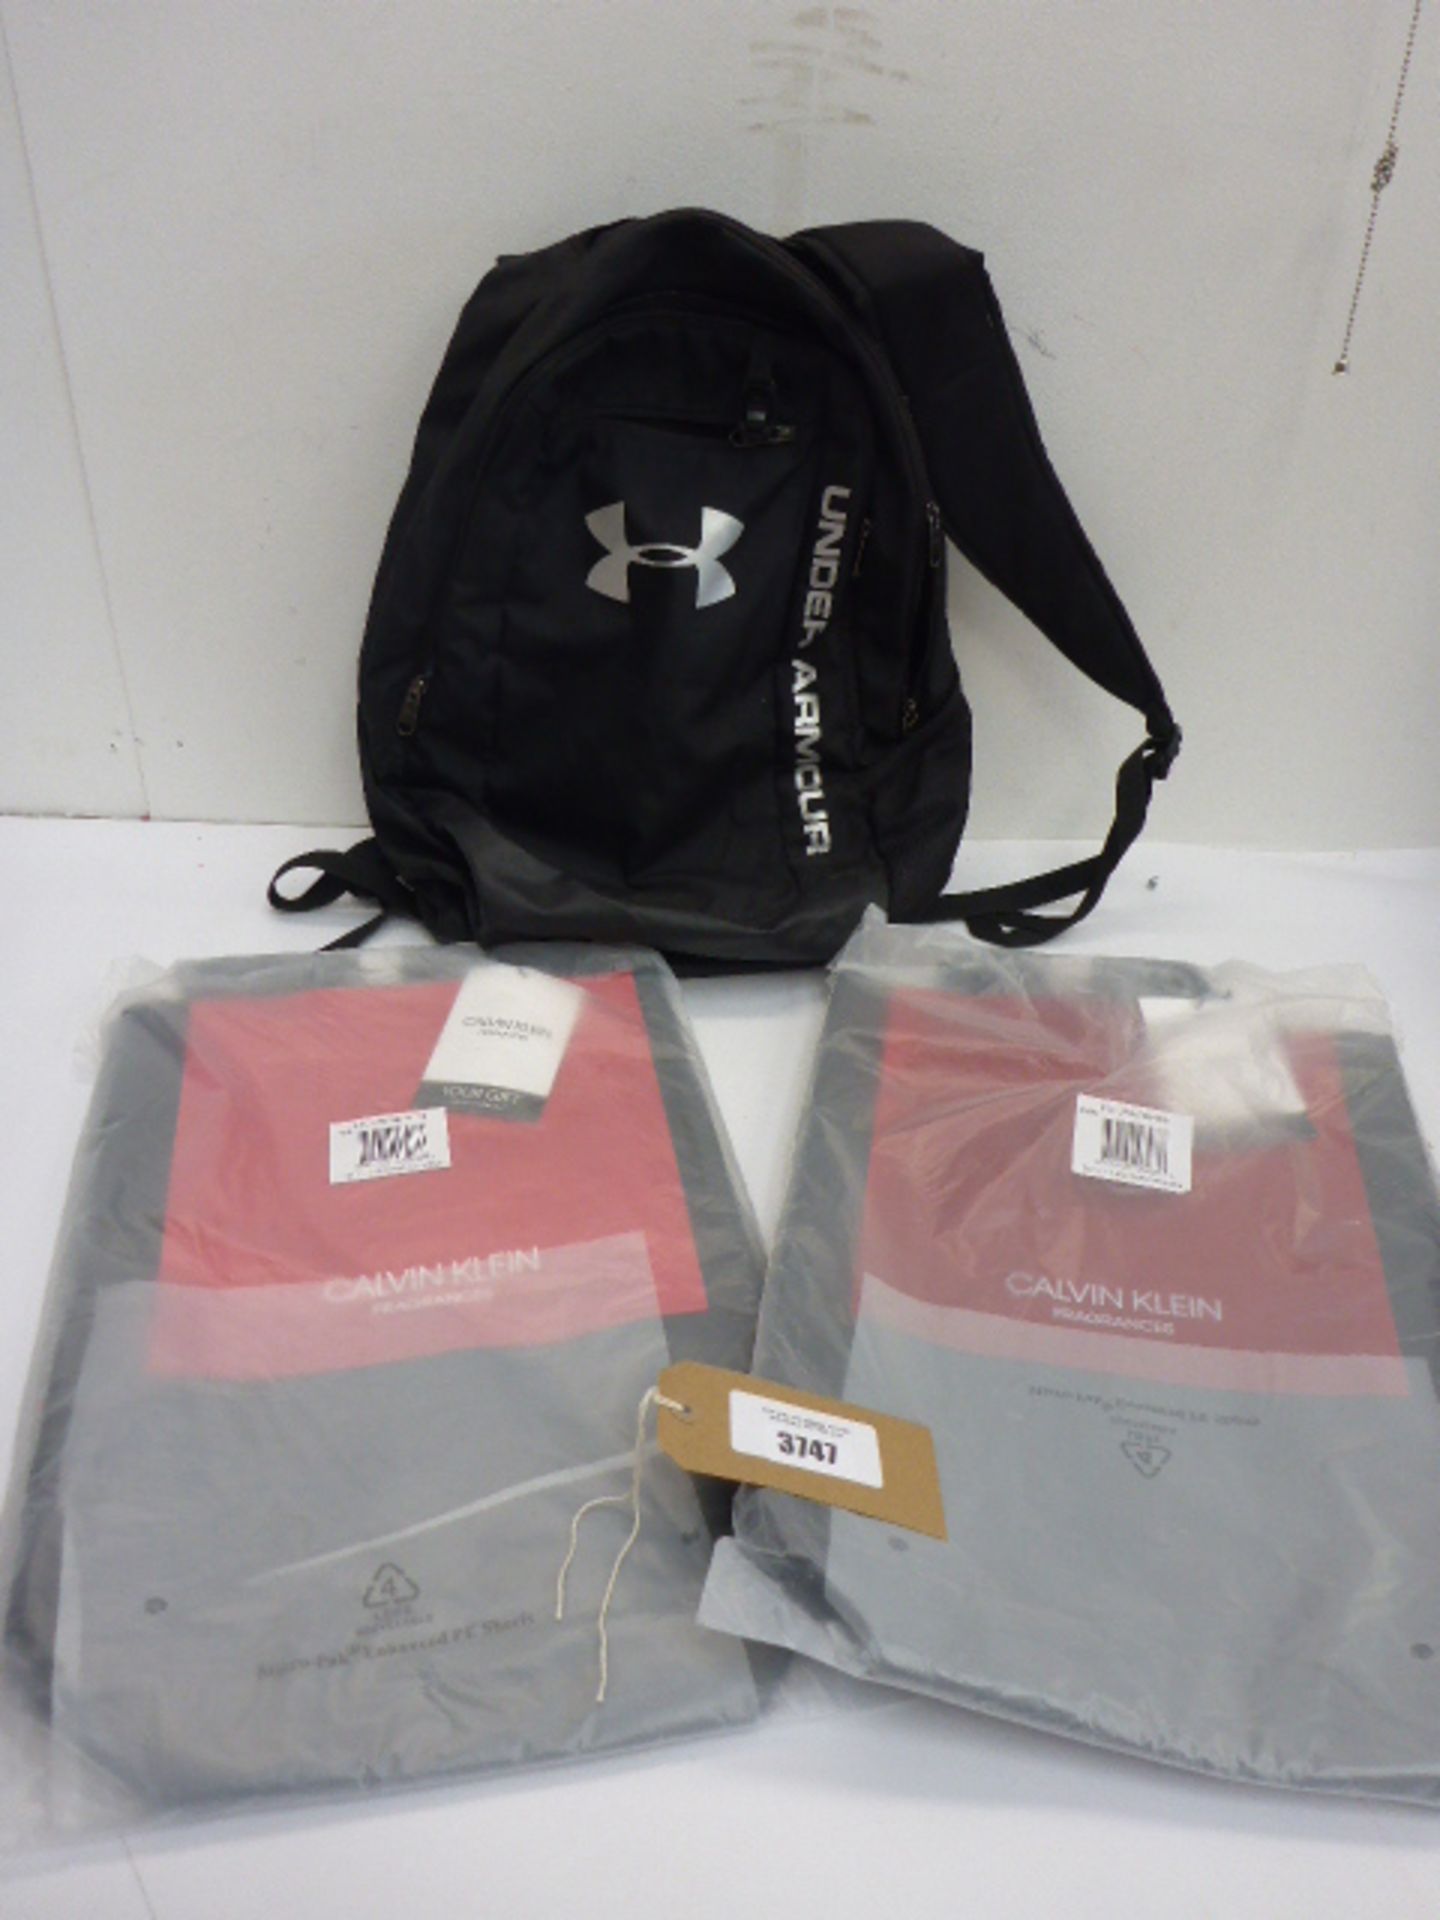 2 Calvin Klein tote bags and Under Armour rucksack (used)